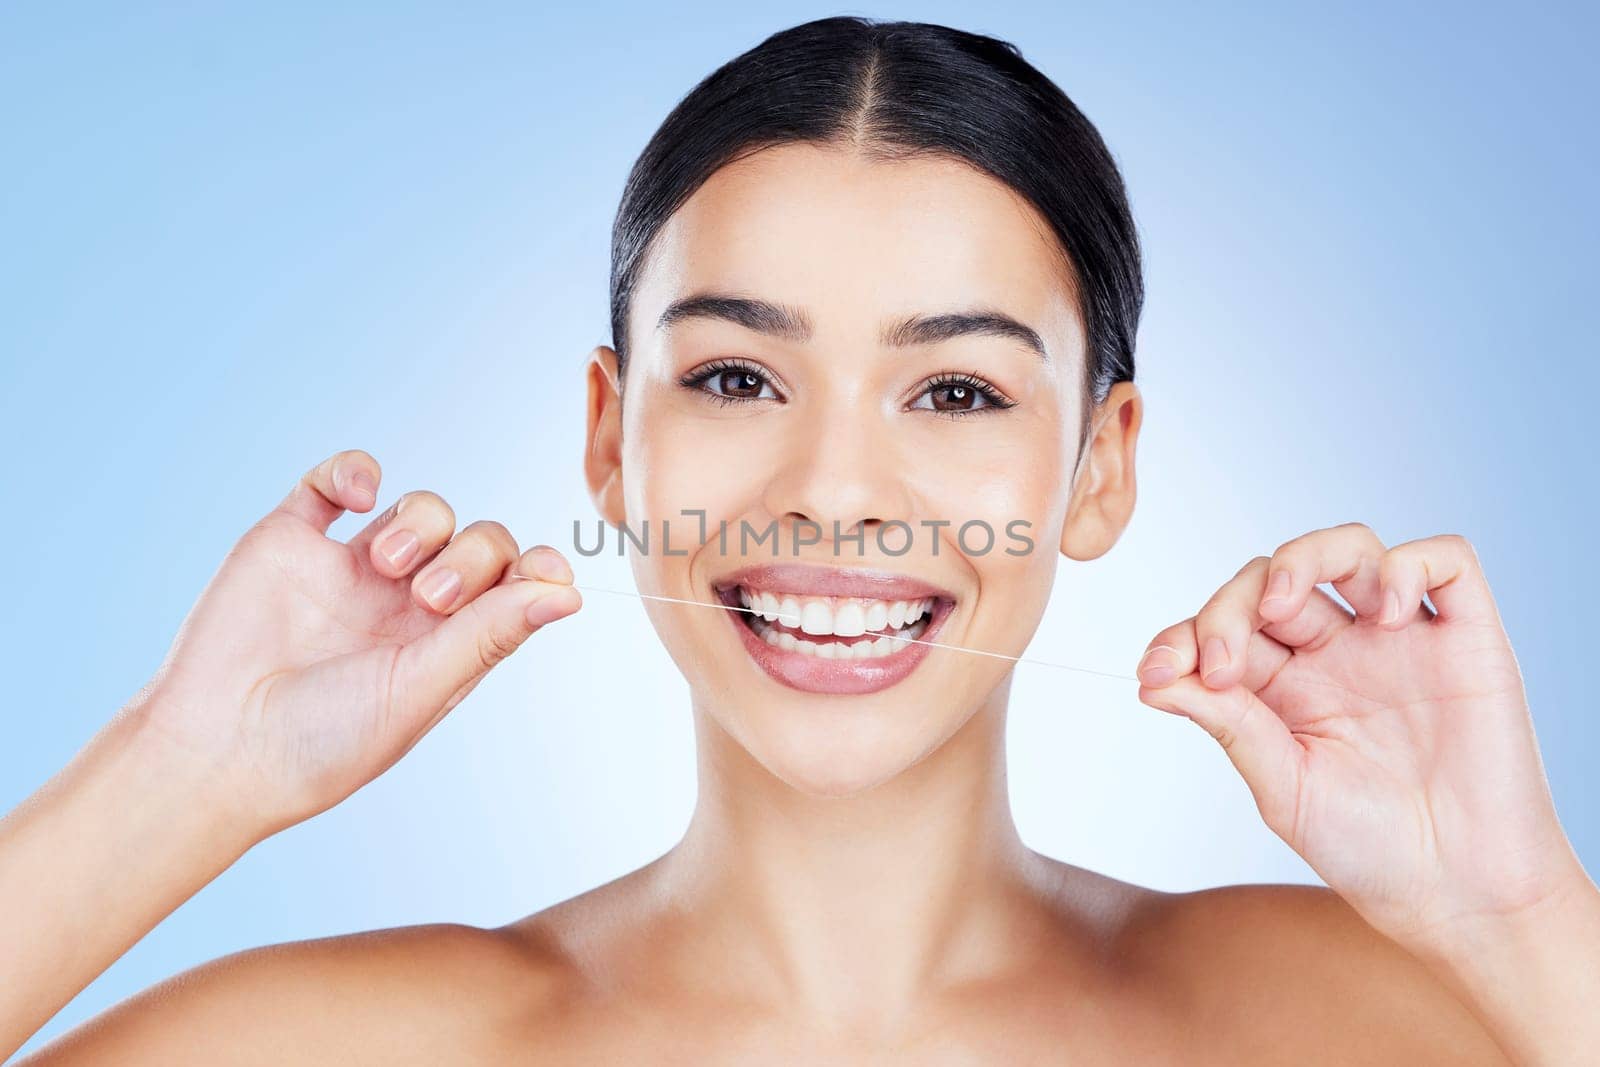 Face, flossing teeth and hygiene with woman, dental and beauty with grooming and mouth care on blue background. Hands, string and healthy gums with fresh breath, health and skin glow in portrait by YuriArcurs